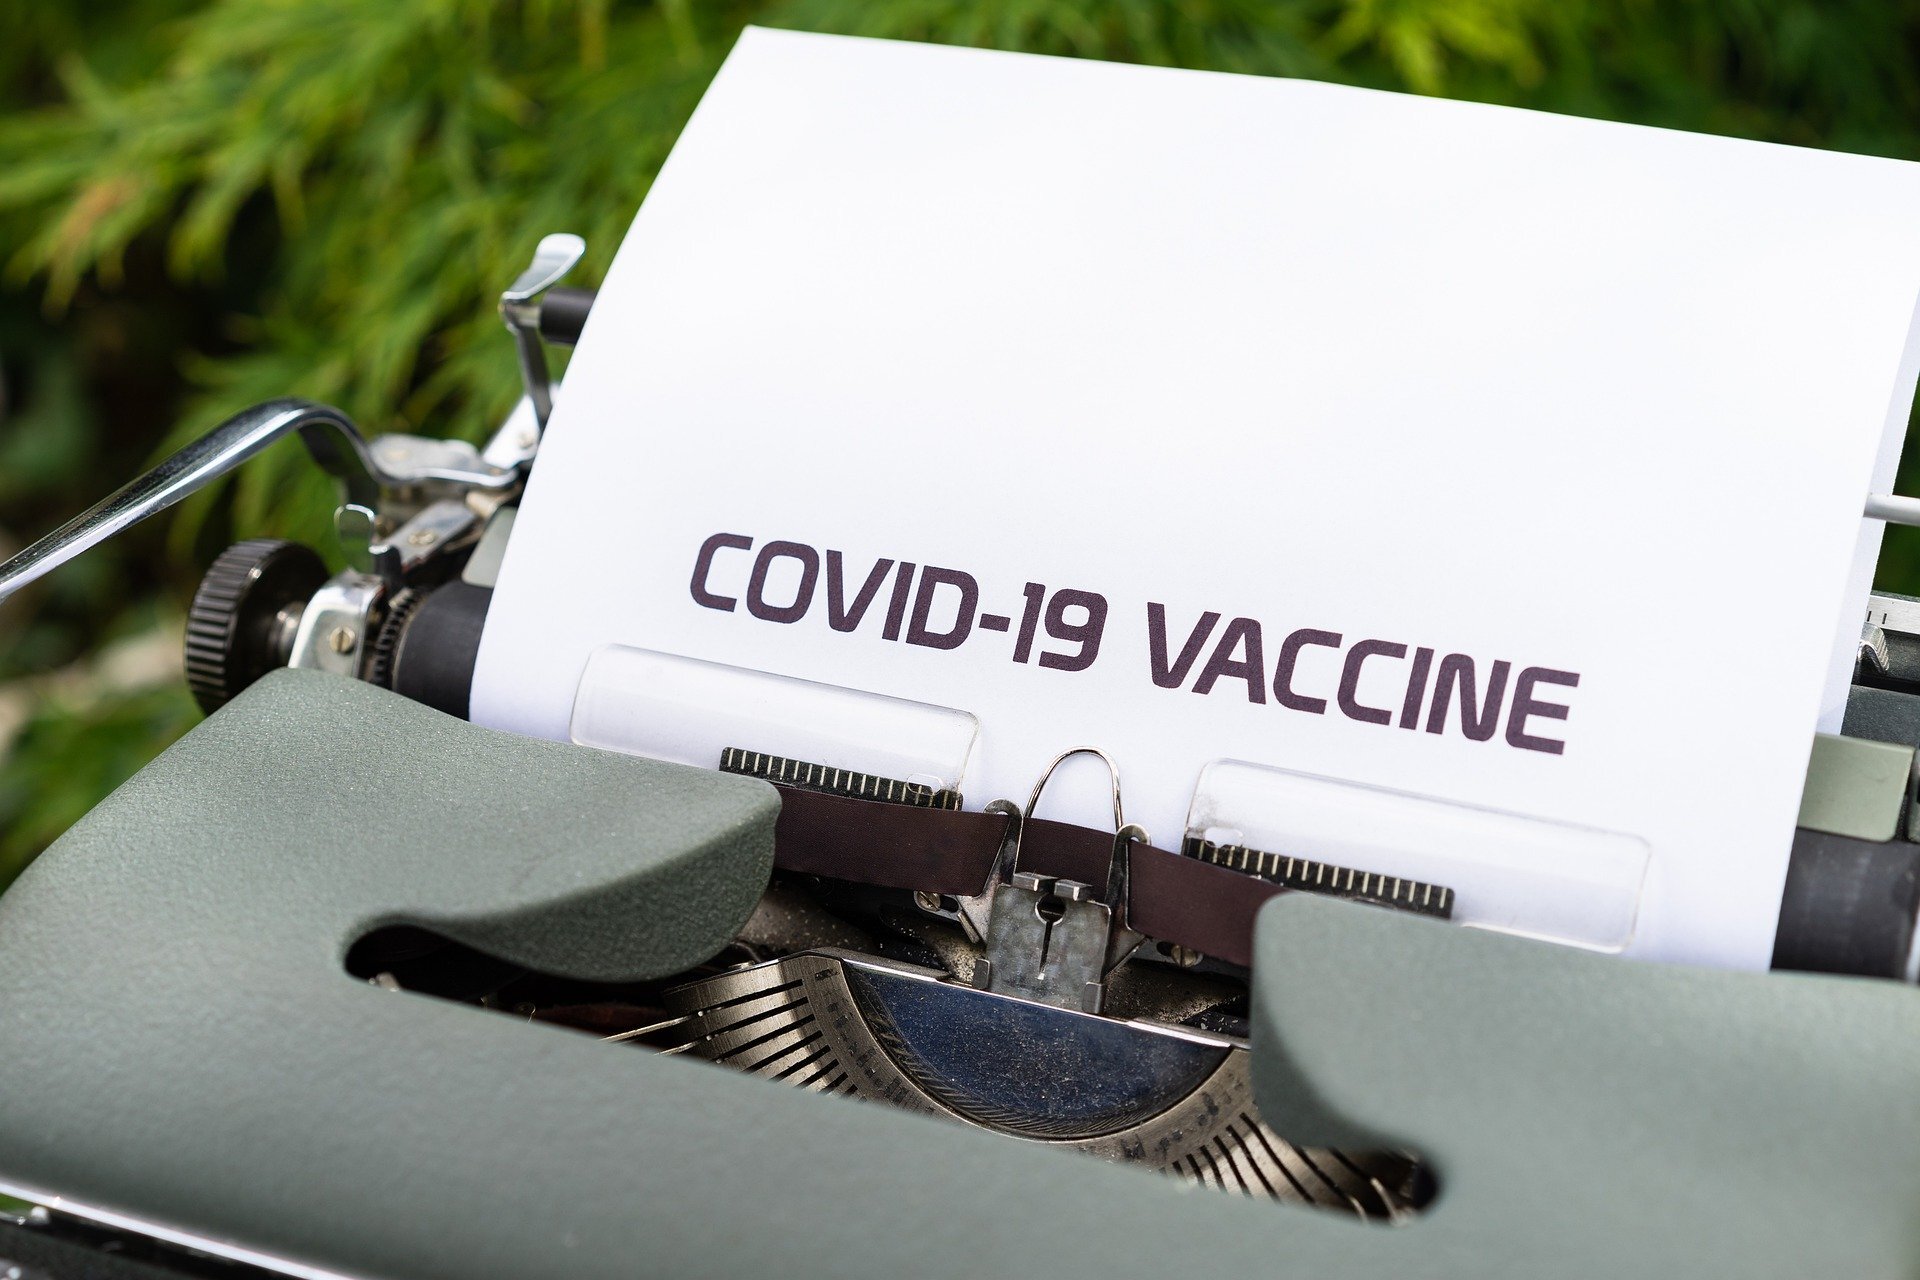 Swiss rapid start of vaccination against Covid-19